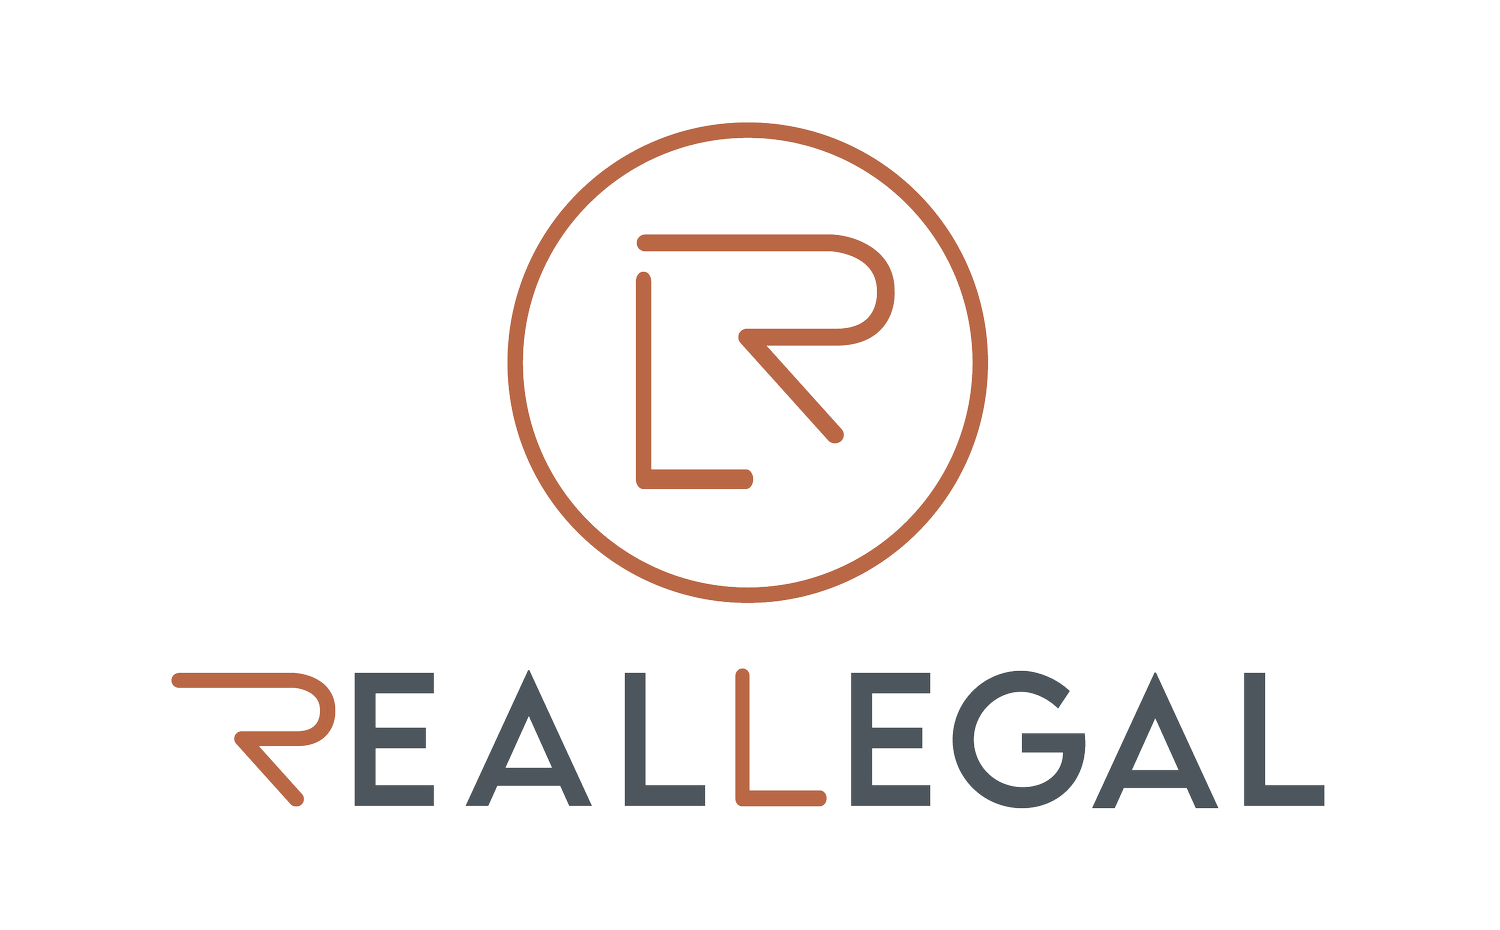 Reallegal